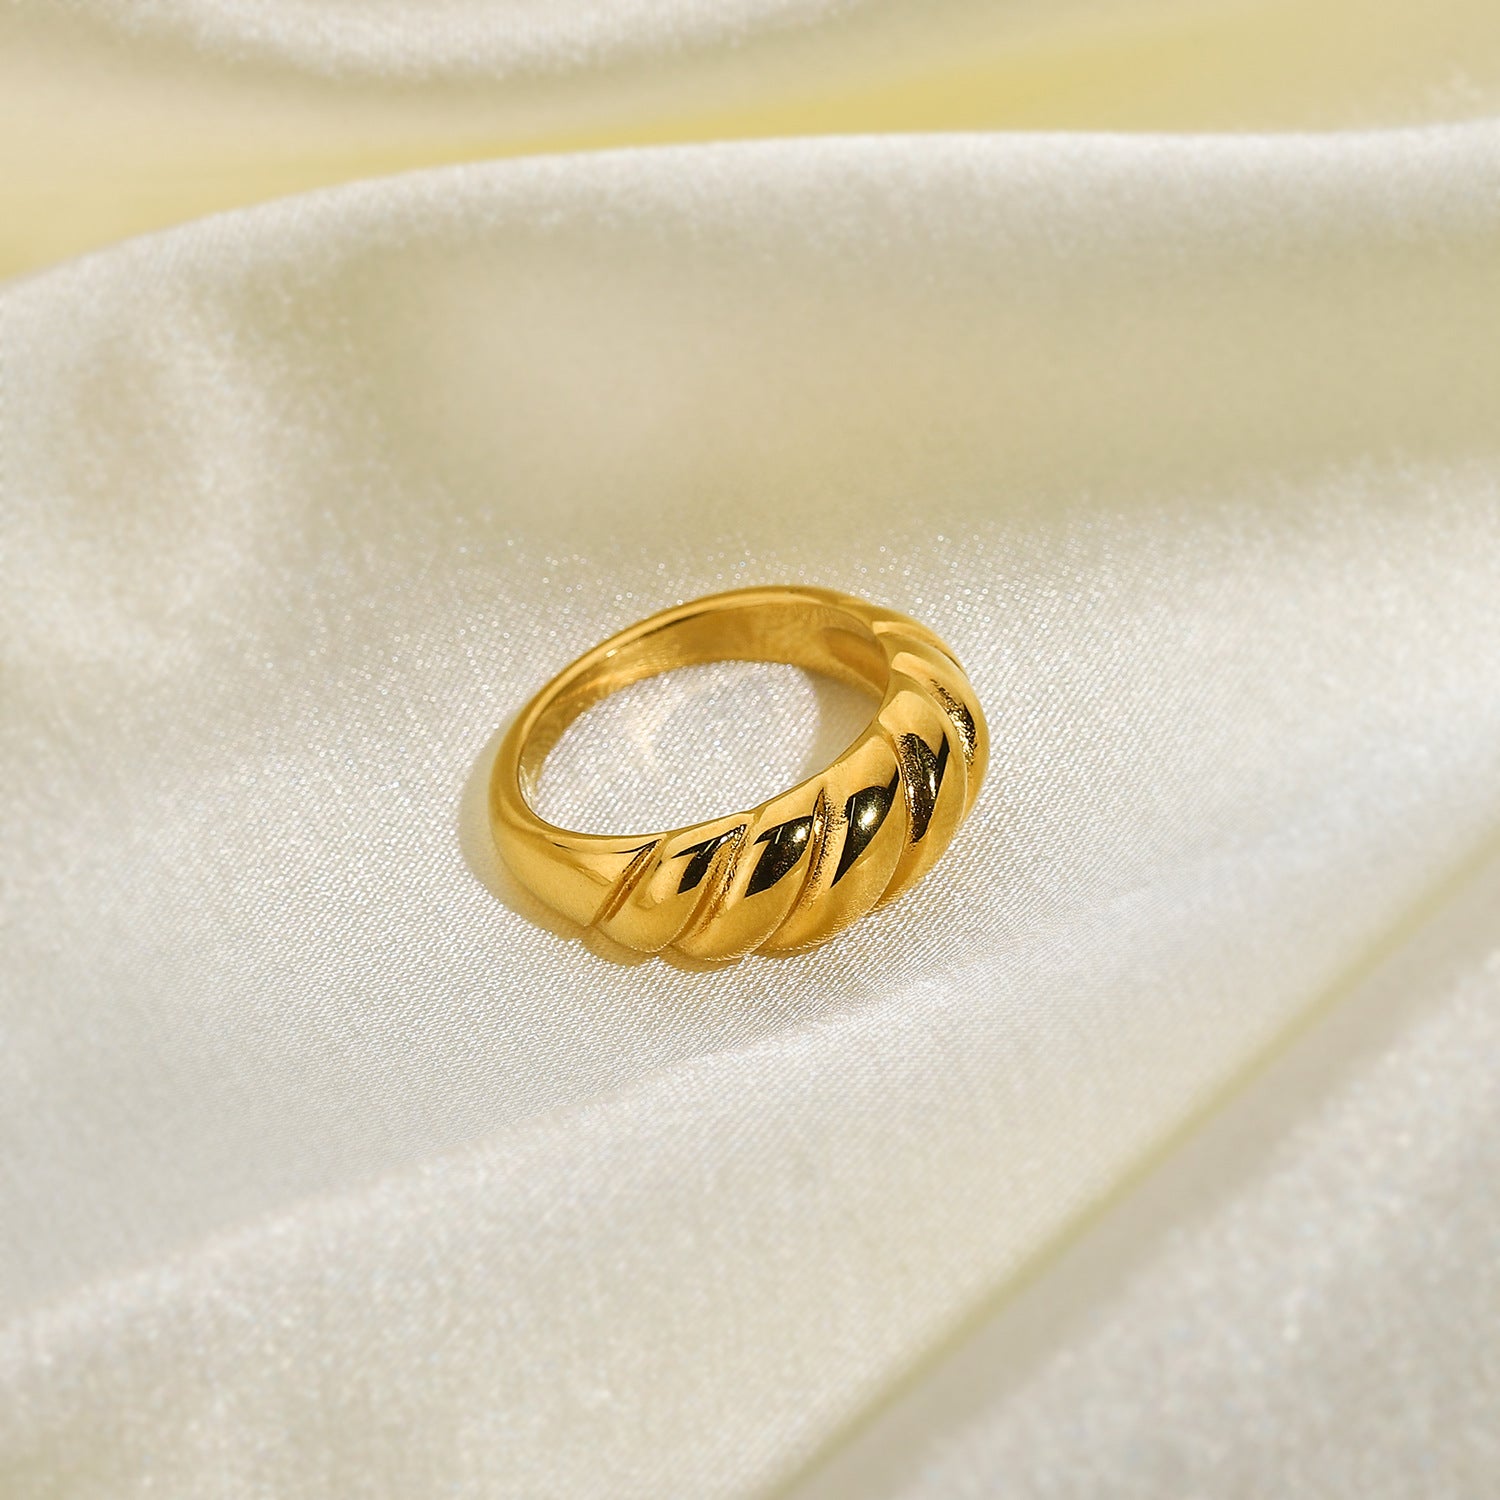 Best Rings To Surprise Your Girlfriend With - INSCMagazine